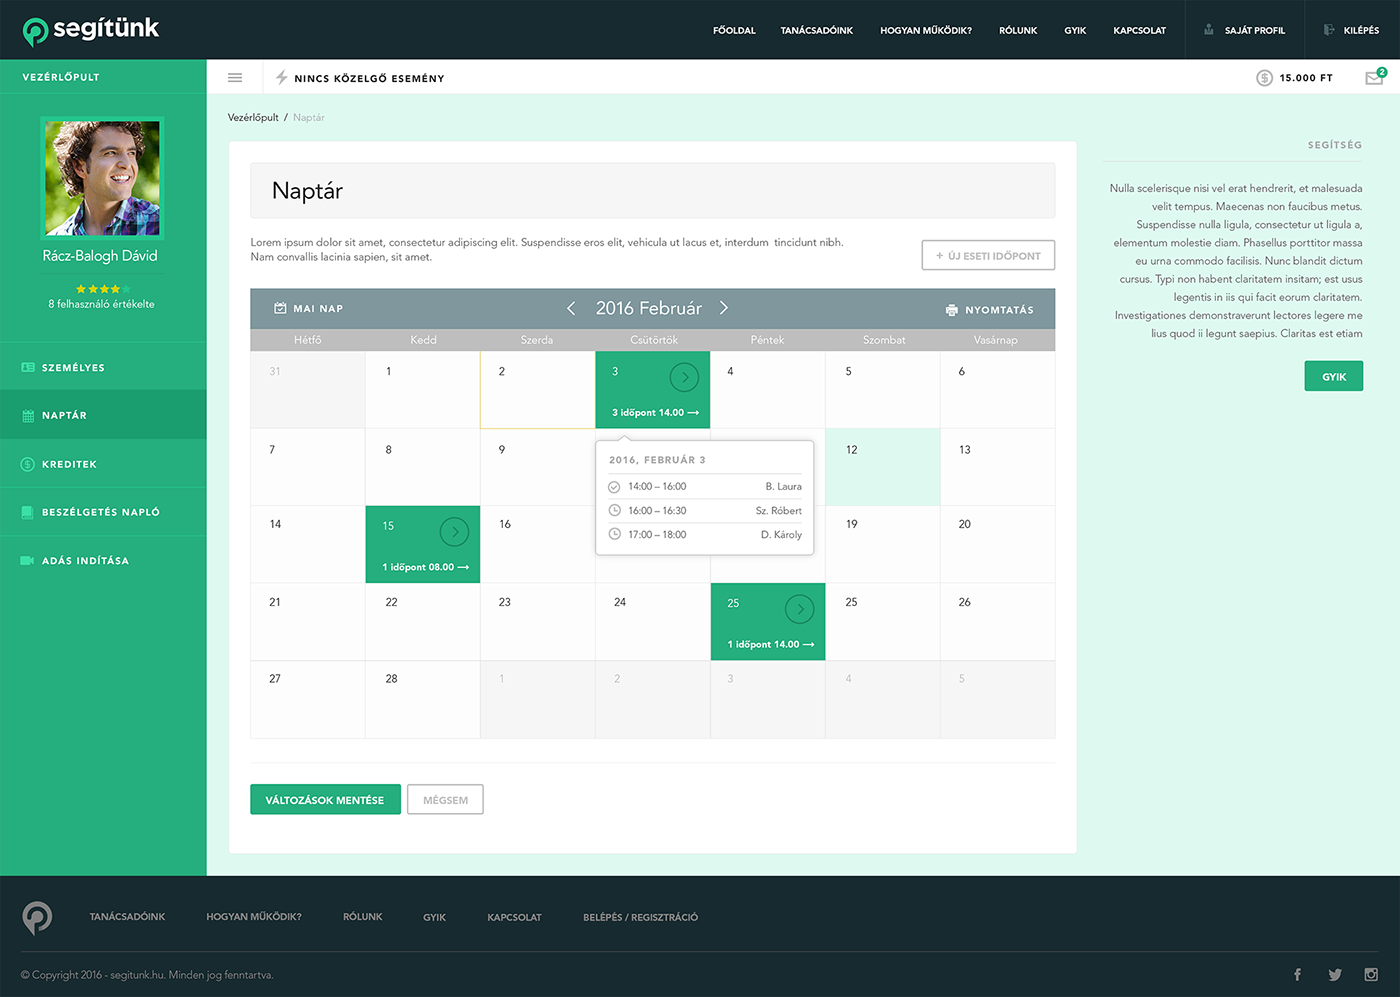 online consultant UI ux Webdesign dashboard admin landing page